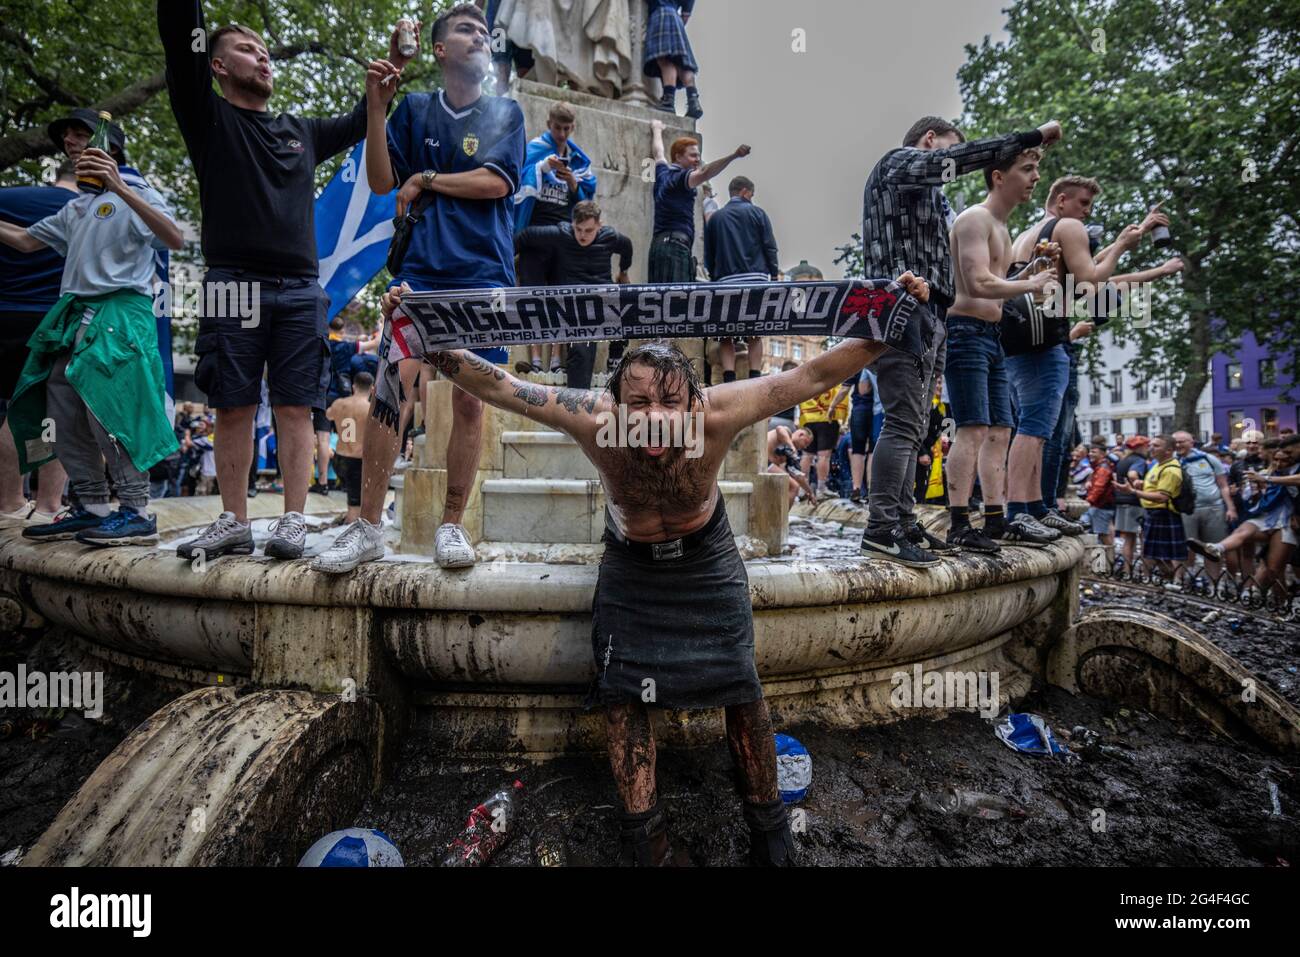 Scottish fans congregate within the William Shakespear fountain in Leicester Square, Central London ahead of the EURO20 match against England Stock Photo